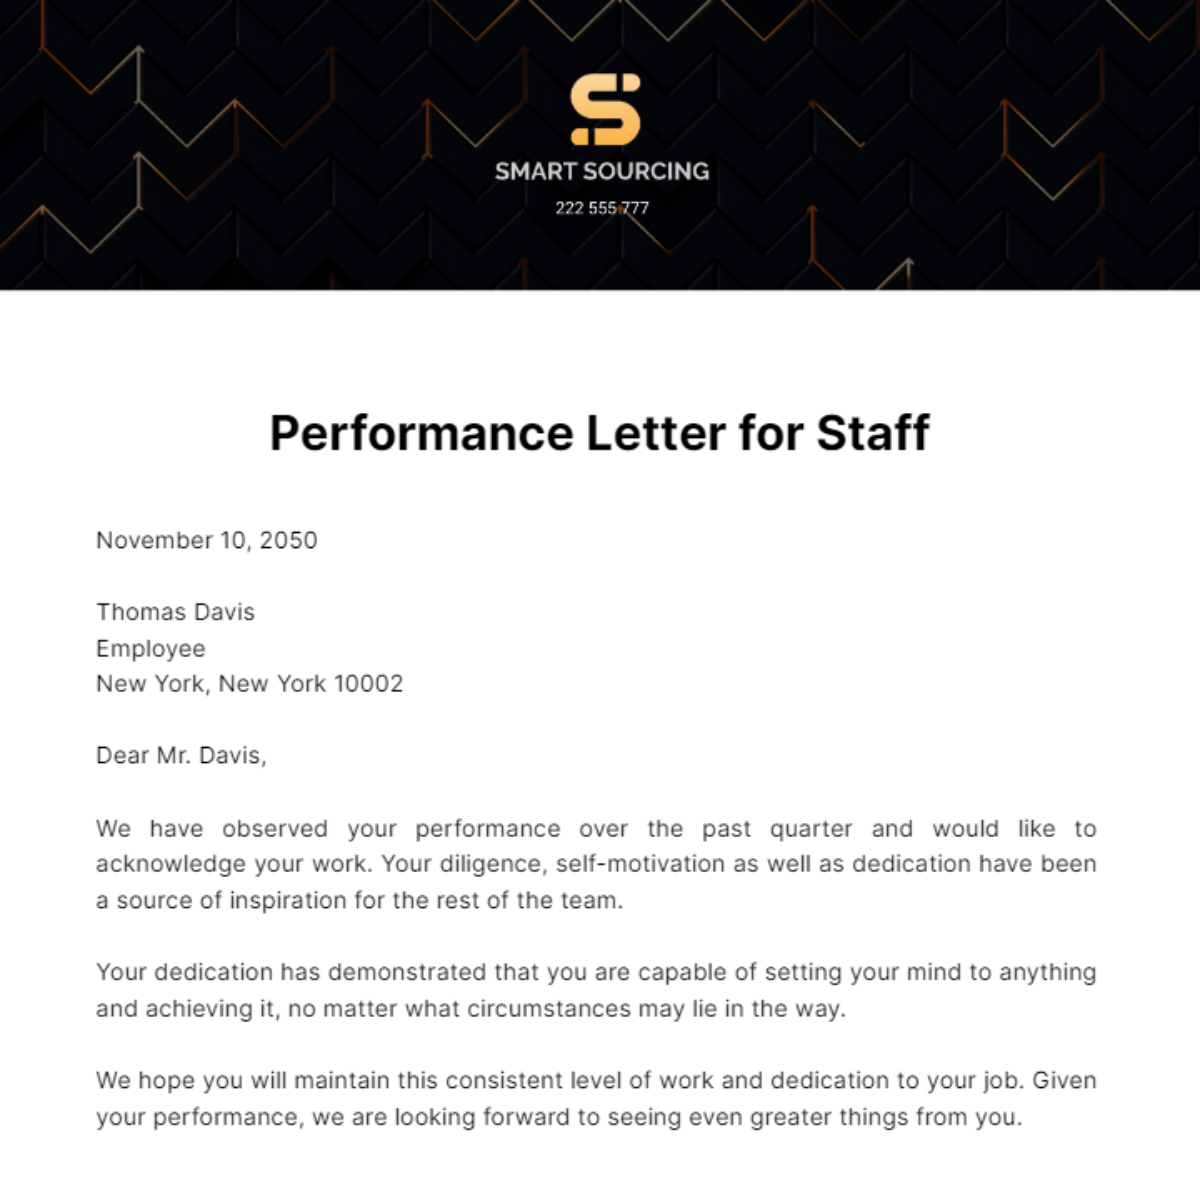 Performance Letter for Staff Template